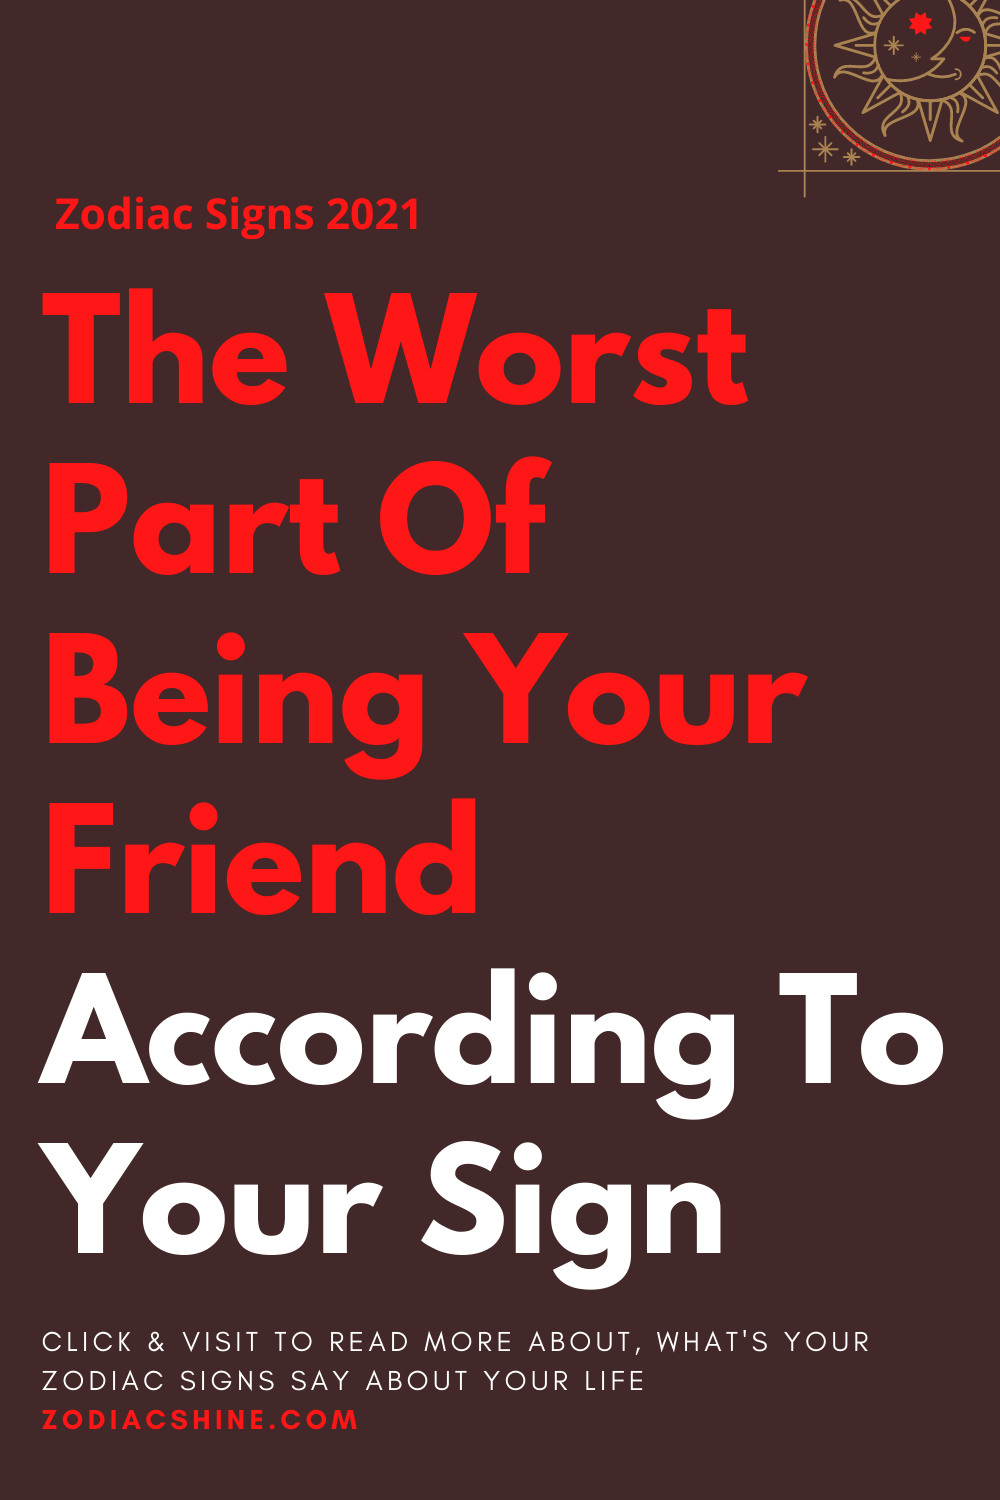 The Worst Part Of Being Your Friend According To Your Sign